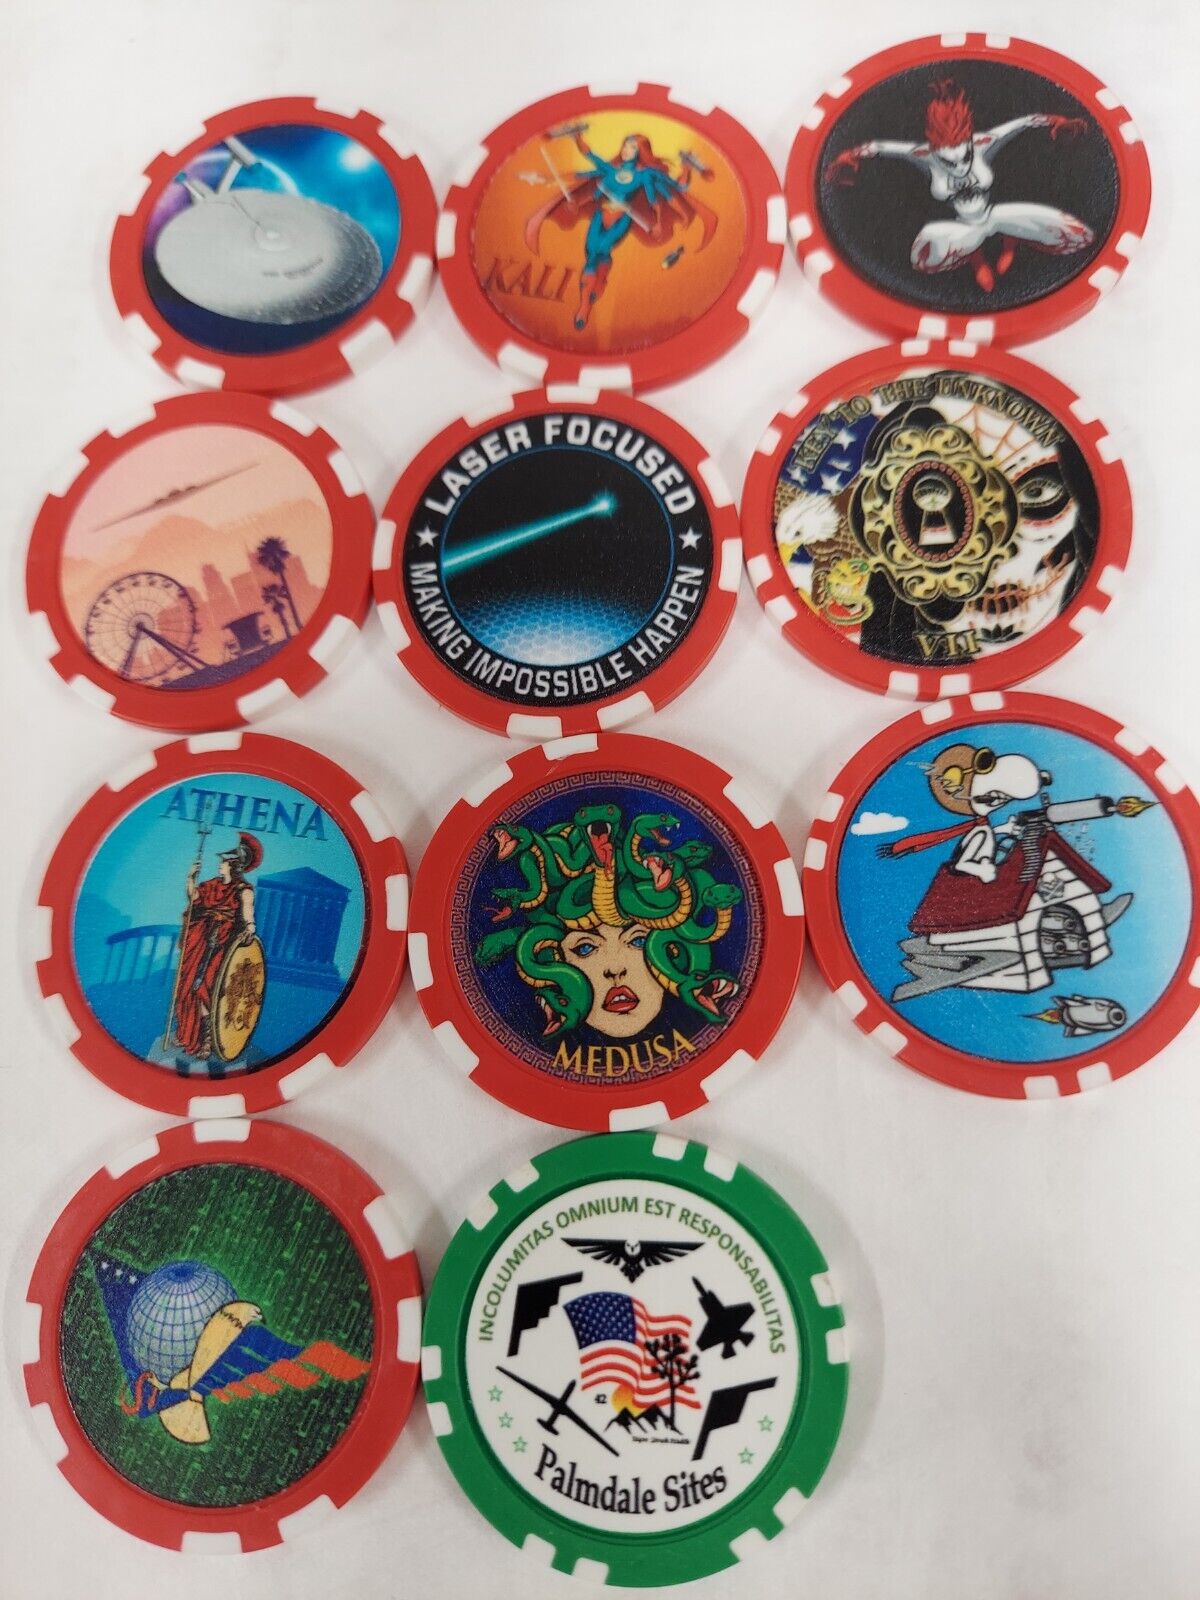 NORTHROP GRUMMAN ATDC EMPLOYEE EXCLUSIVE POKER CHIP LOT, 11 TOTAL VERY LIMITED 